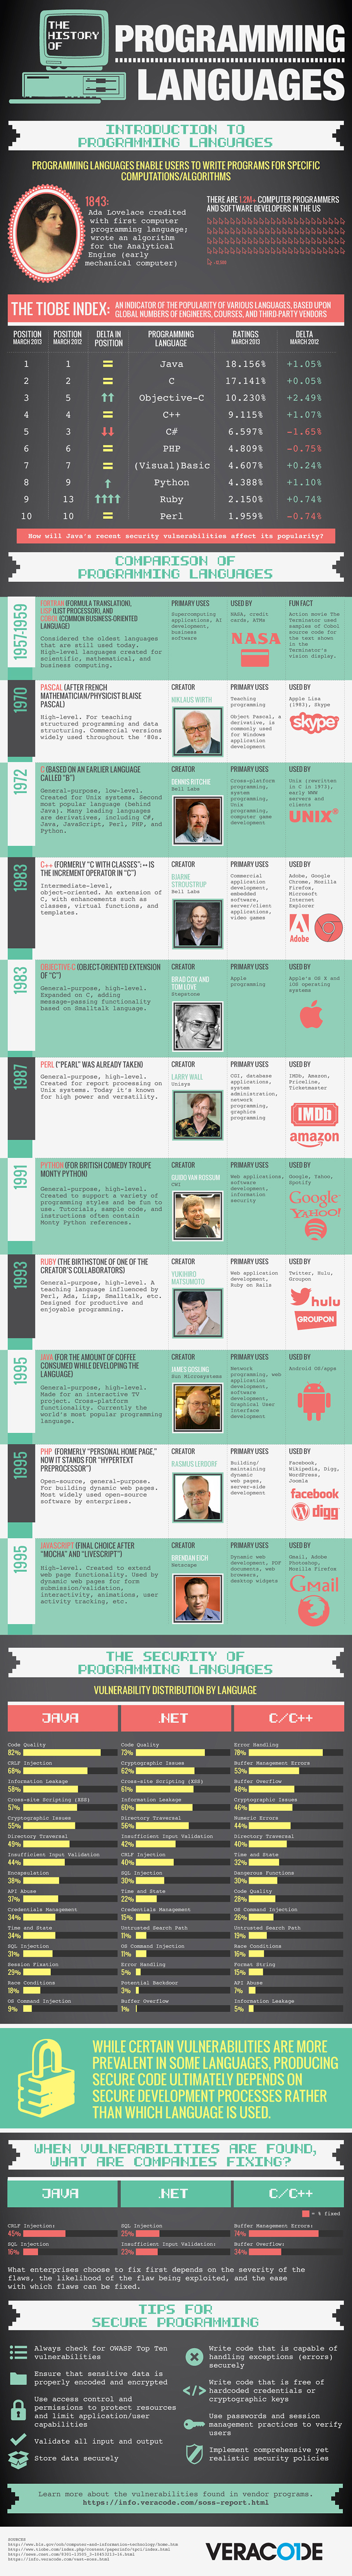 infographic the history of programming languages